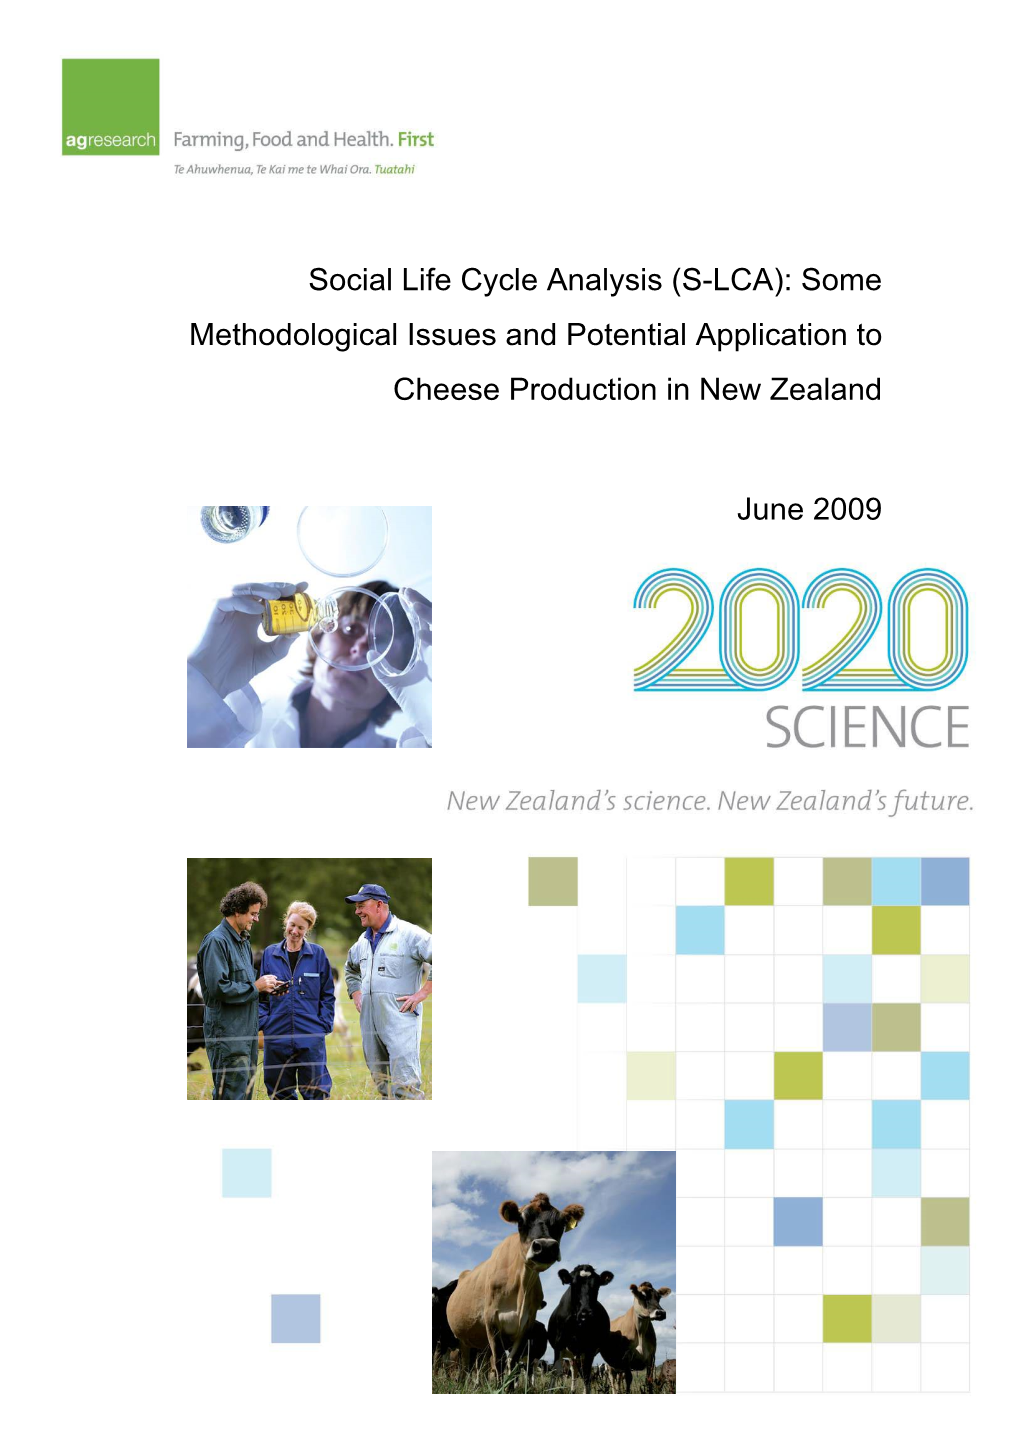 Social Life Cycle Analysis (S-LCA): Some Methodological Issues and Potential Application to Cheese Production in New Zealand